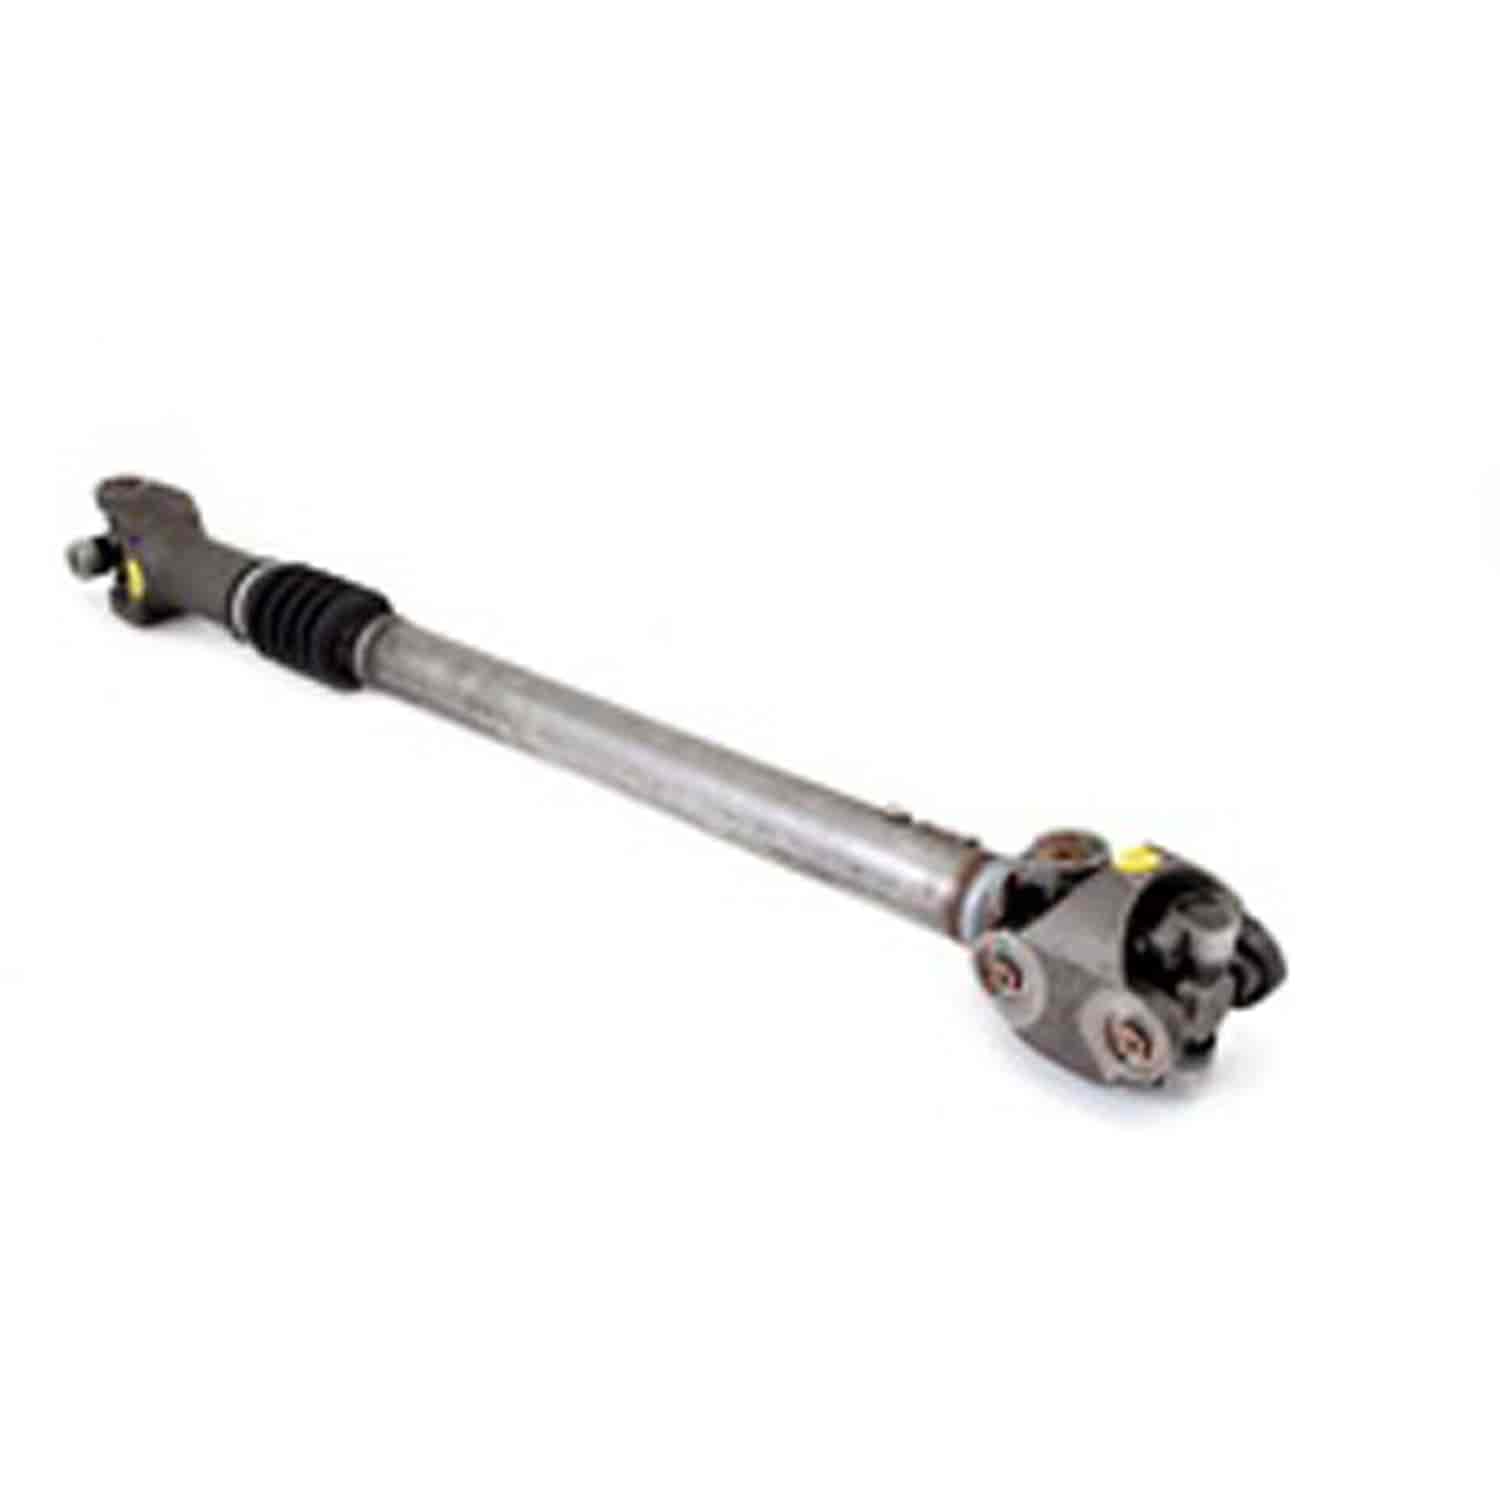 Stock replacement front driveshaft from Omix-ADA, Fits 1994 Jeep Grand Cherokee ZJ with a 6-cyli